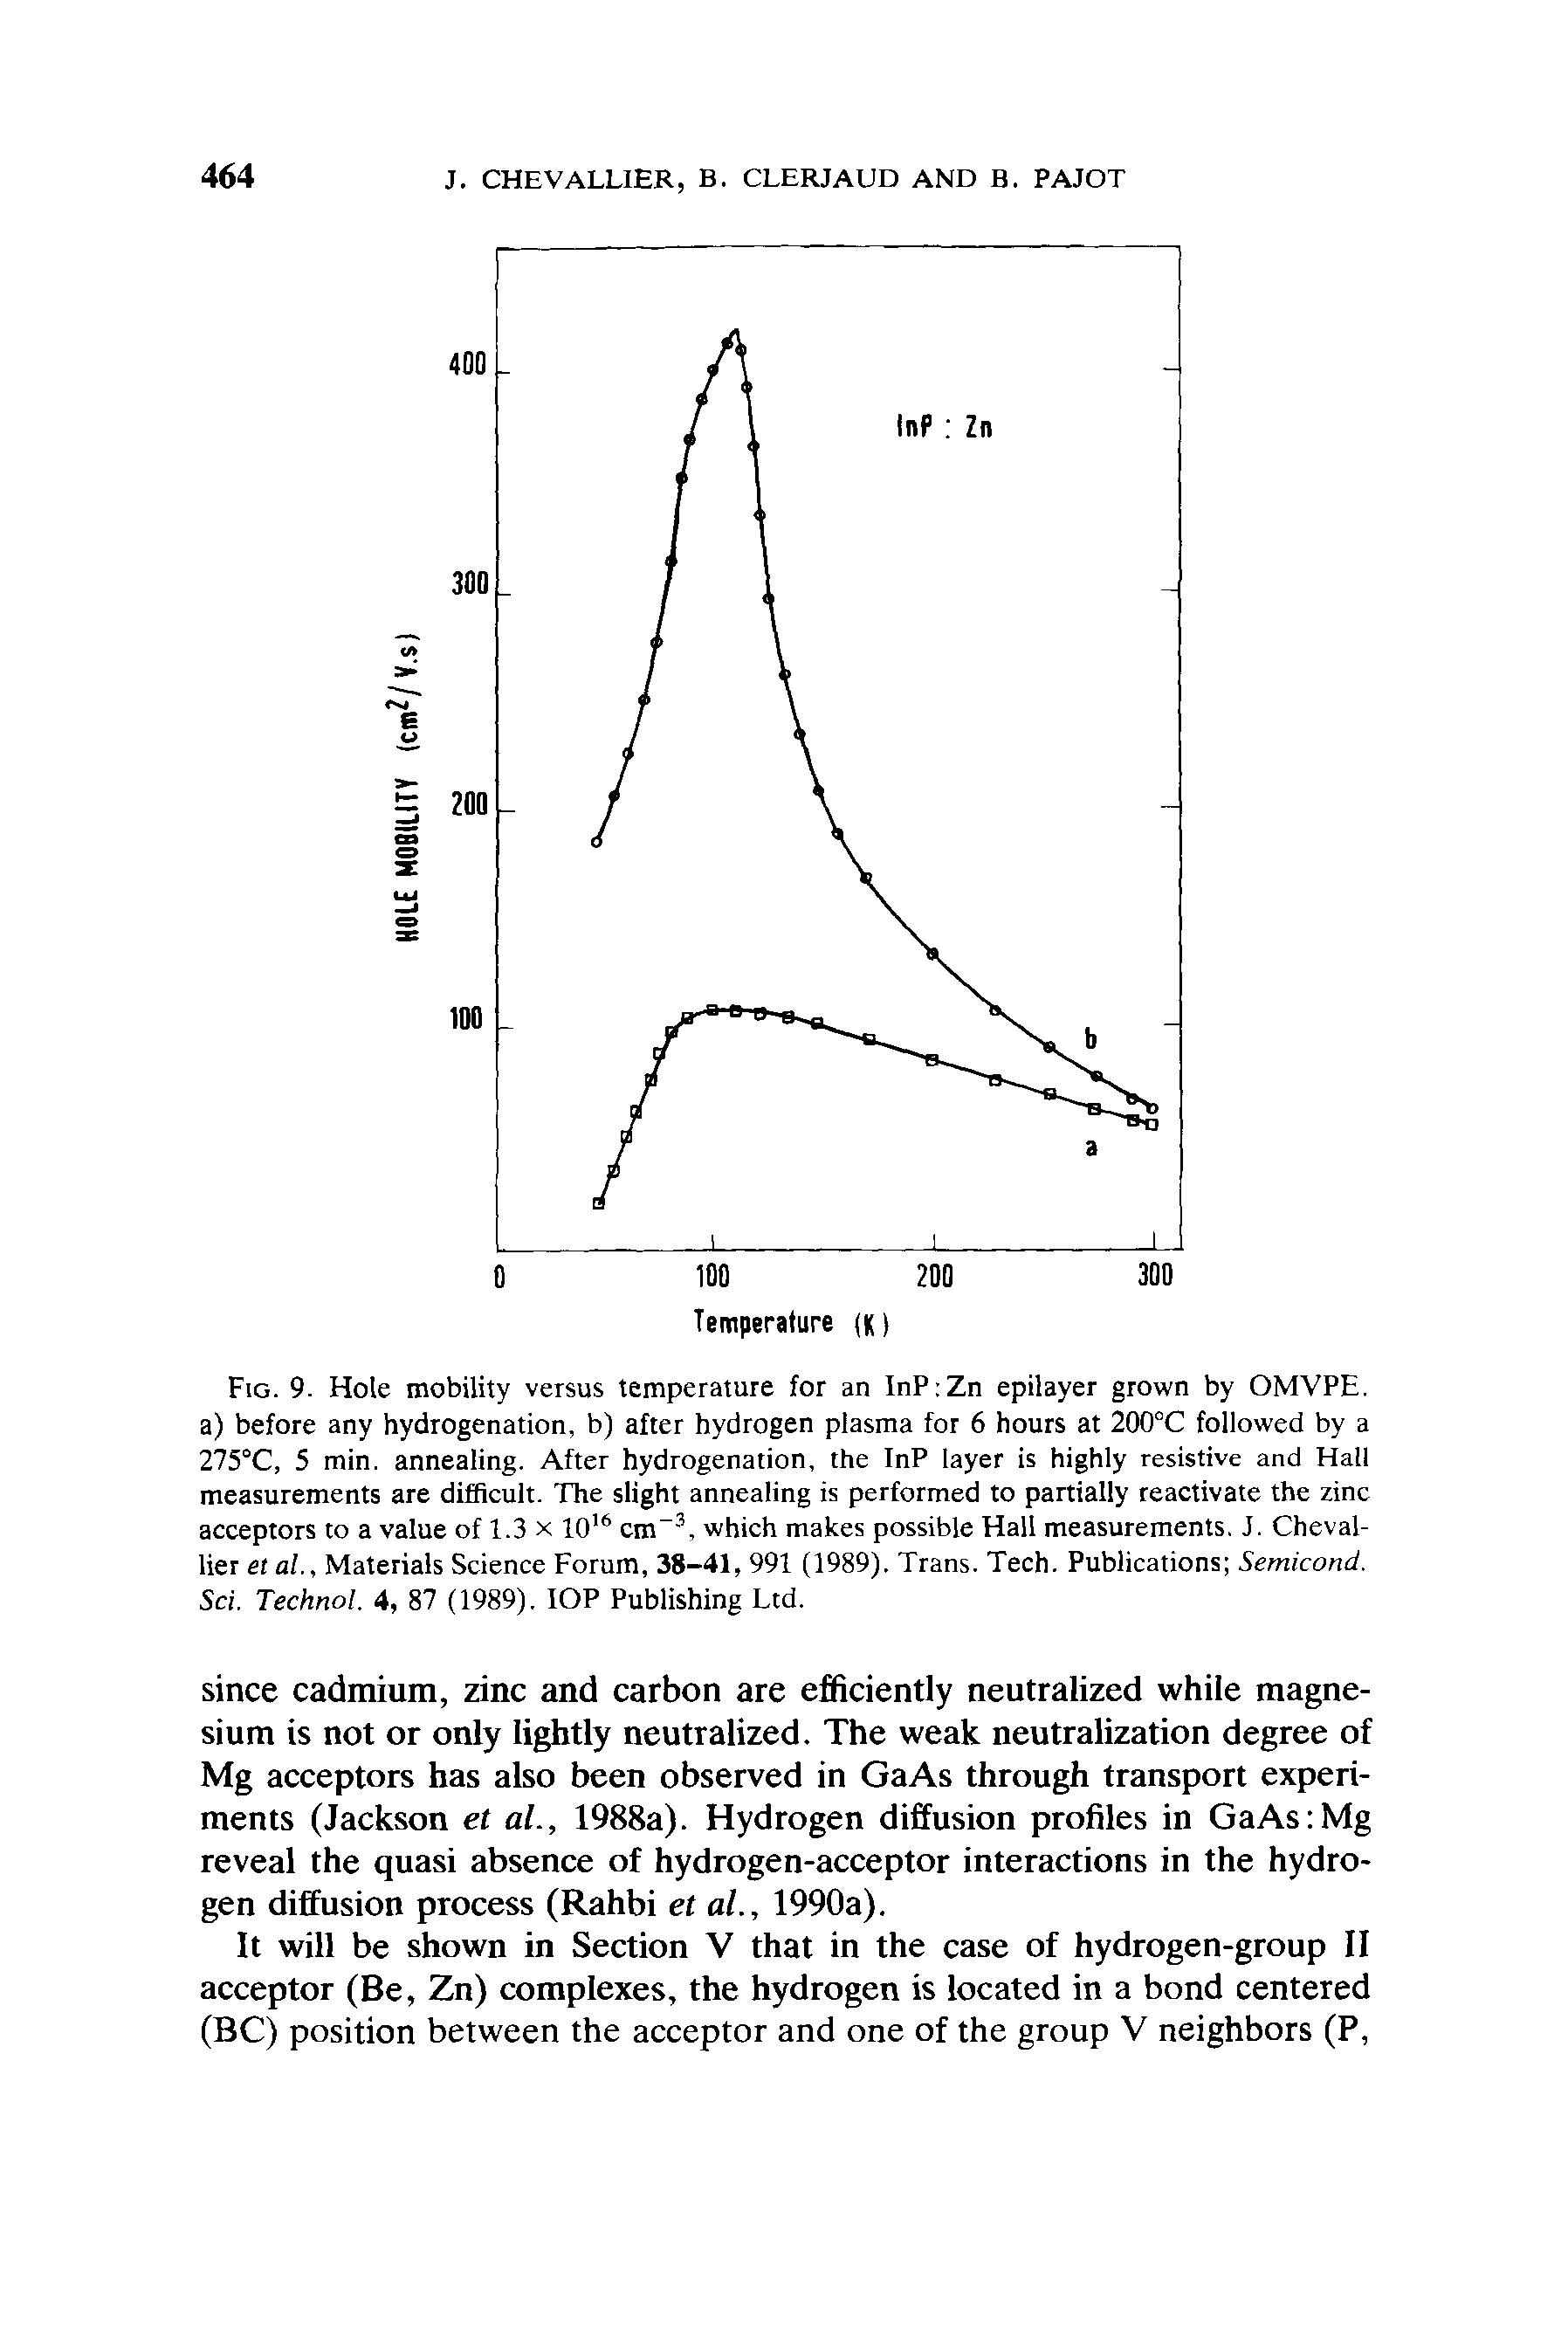 Fig. 9. Hole mobility versus temperature for an InP Zn epilayer grown by OMVPE. a) before any hydrogenation, b) after hydrogen plasma for 6 hours at 200°C followed by a 275°C, 5 min. annealing. After hydrogenation, the InP layer is highly resistive and Hall measurements are difficult. The slight annealing is performed to partially reactivate the zinc acceptors to a value of 1.3 x 1016 cm-3, which makes possible Hall measurements. J. Cheval-lier et al., Materials Science Forum, 38-41, 991 (1989). Trans. Tech. Publications Semicond. Sci. Technol. 4, 87 (1989). IOP Publishing Ltd.